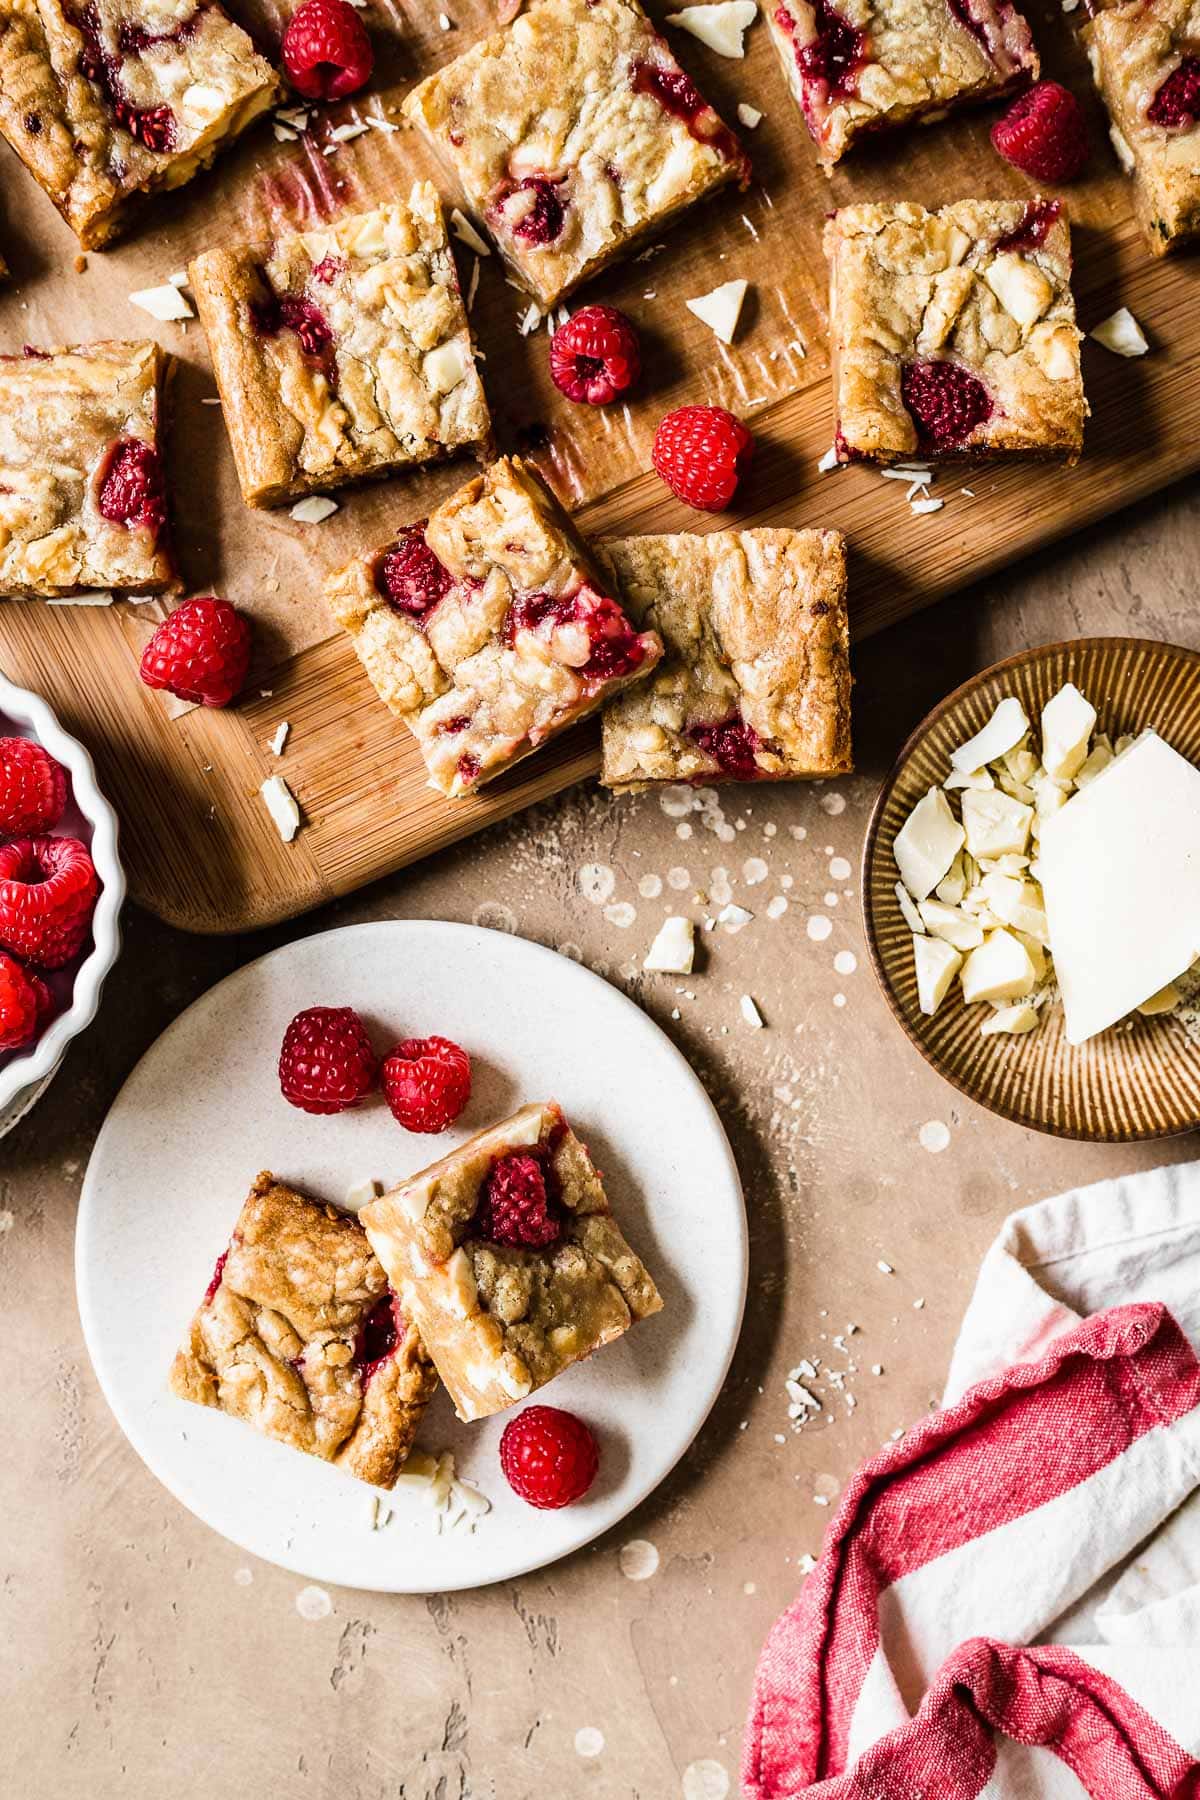 Two blondie bars on a small plate with raspberries. There are more cut blondies on a wooden cutting board nearby, along with a small bowl of chopped white chocolate.